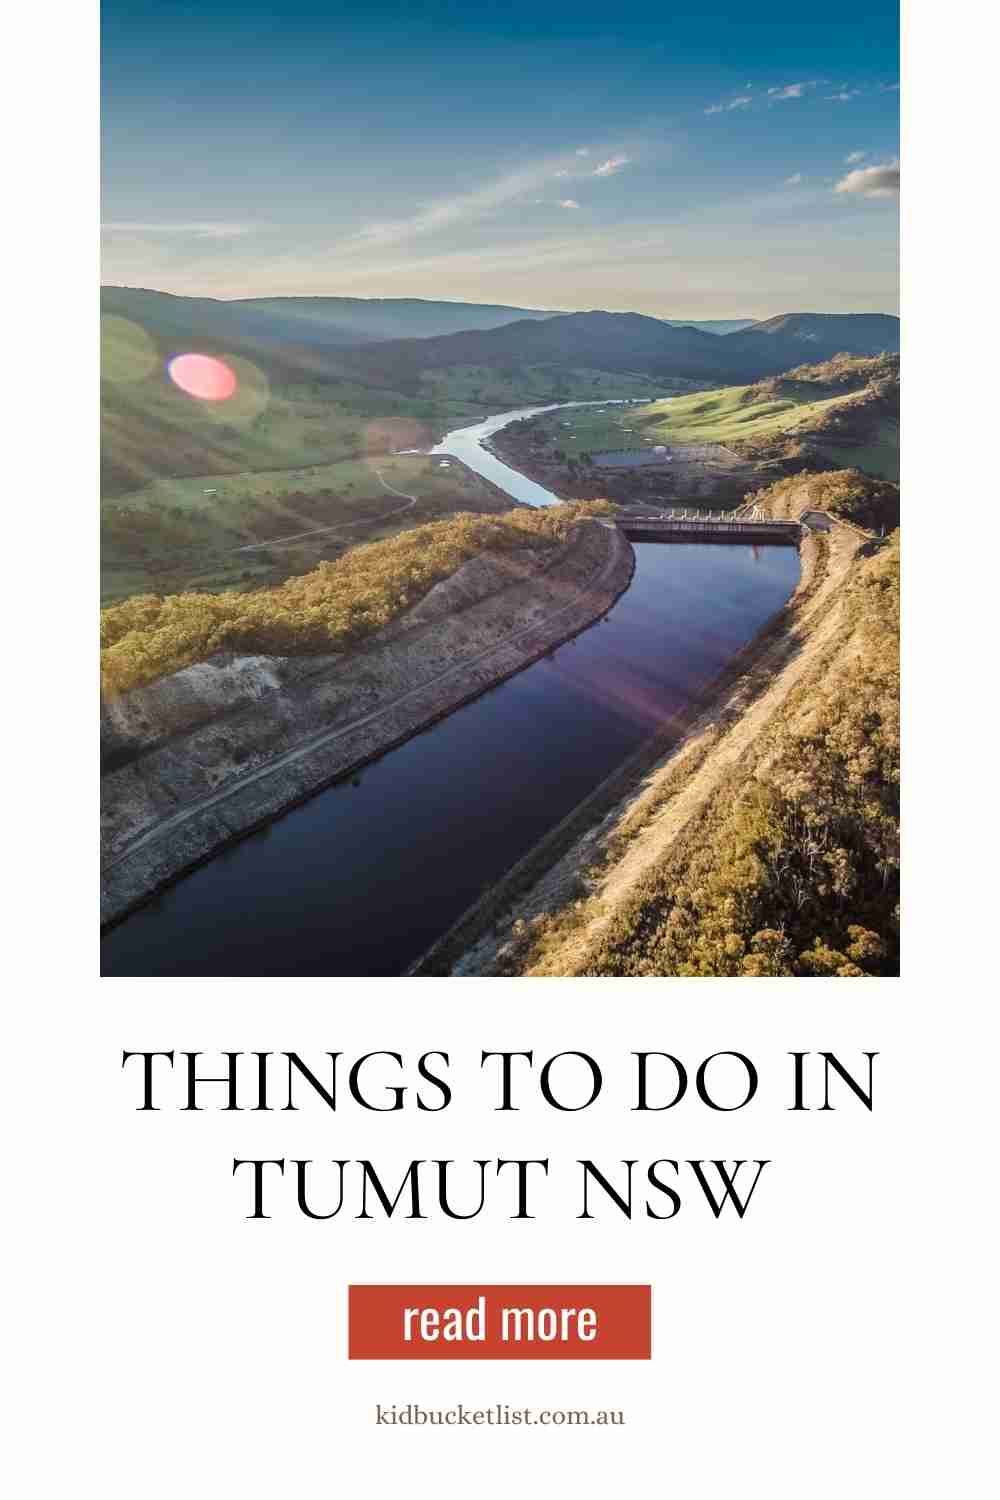 What to do in Tumut NSW